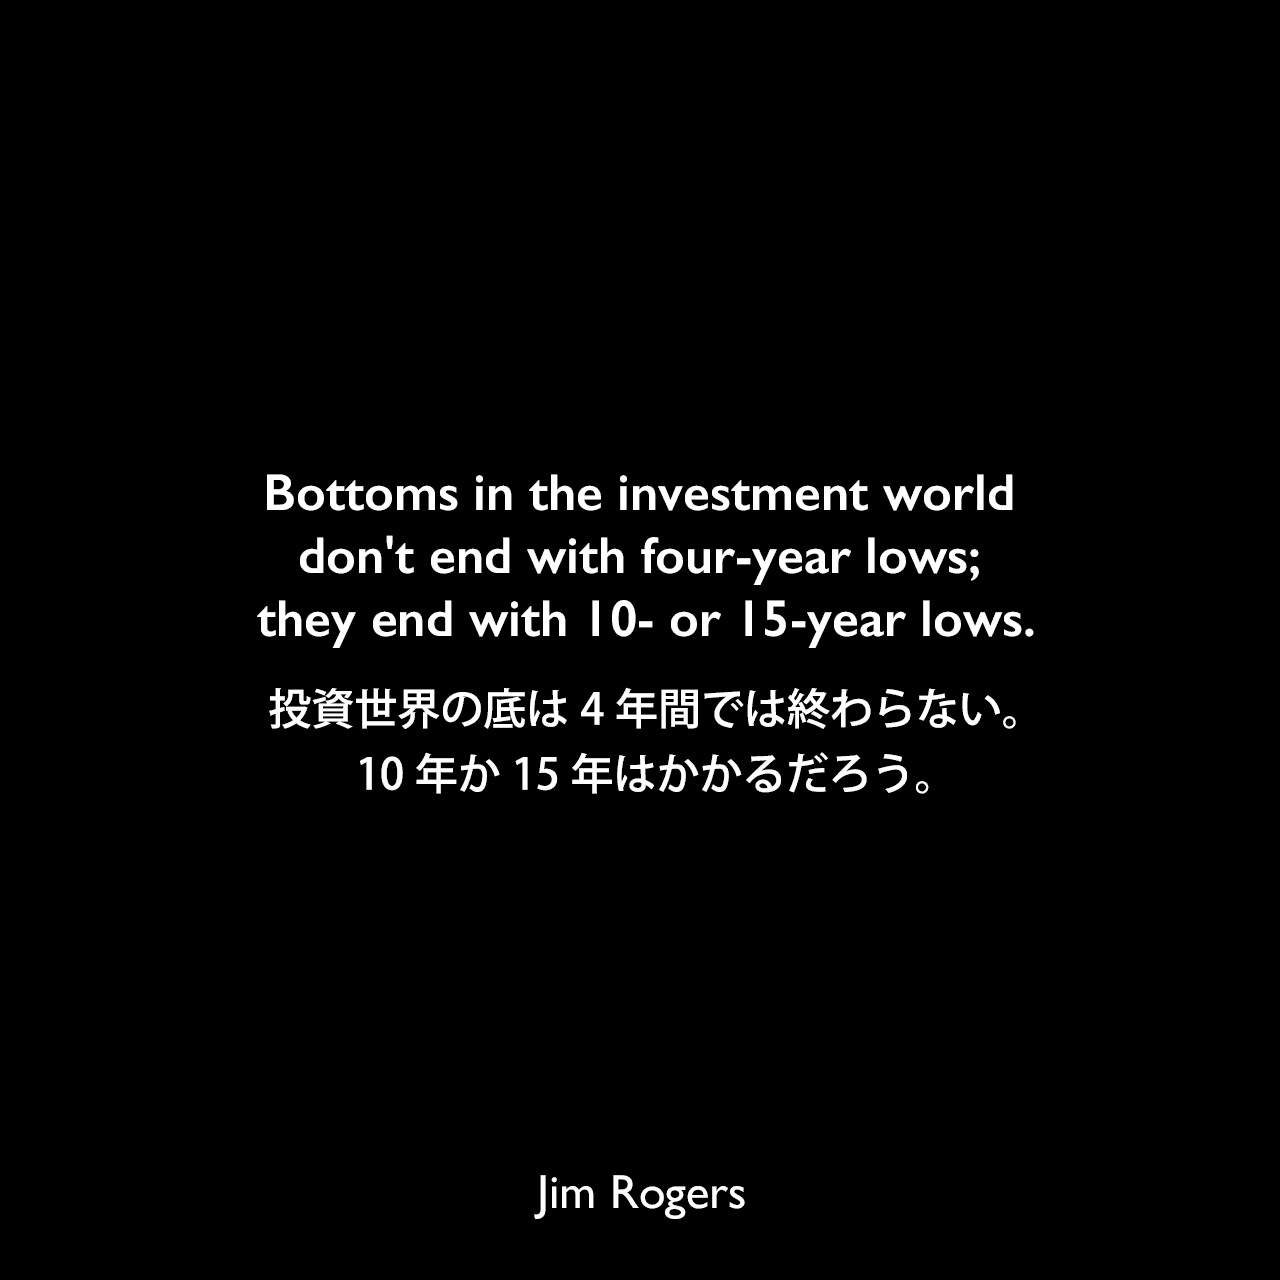 Bottoms in the investment world don't end with four-year lows; they end with 10- or 15-year lows.投資世界の底は4年間では終わらない。10年か15年はかかるだろう。Jim Rogers